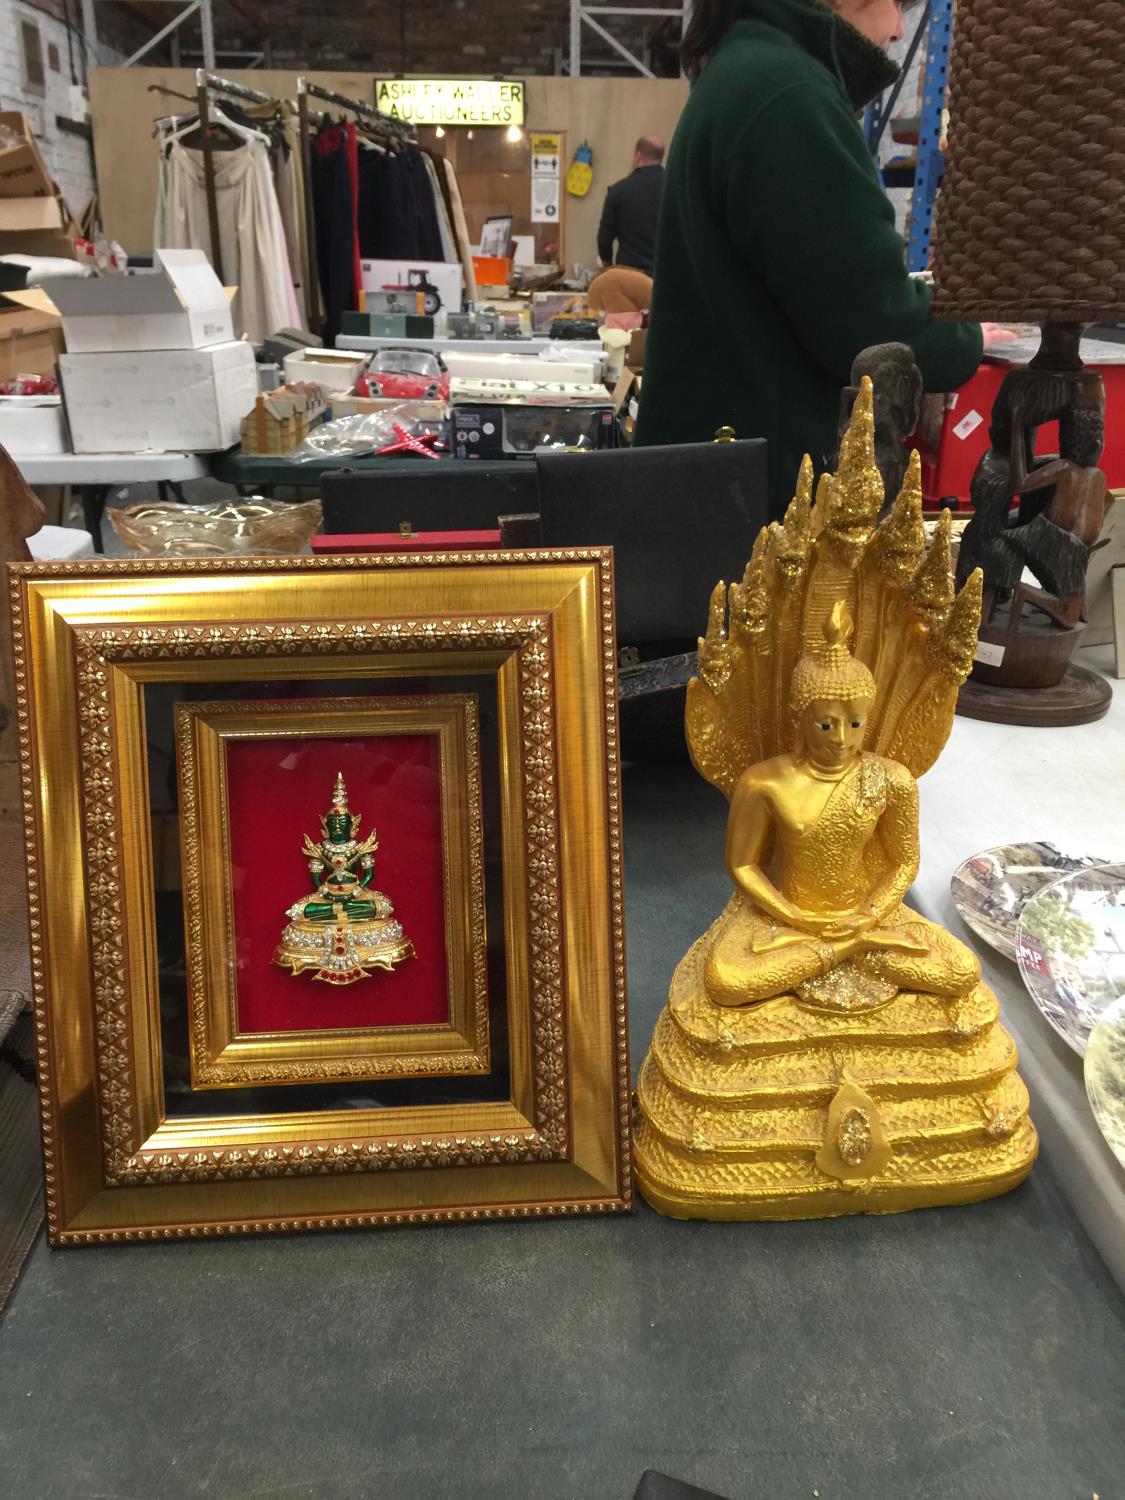 A GOLD COLOURED FIGURE OF A DEITY AND A FRAMED 3D DEITY - Image 2 of 3